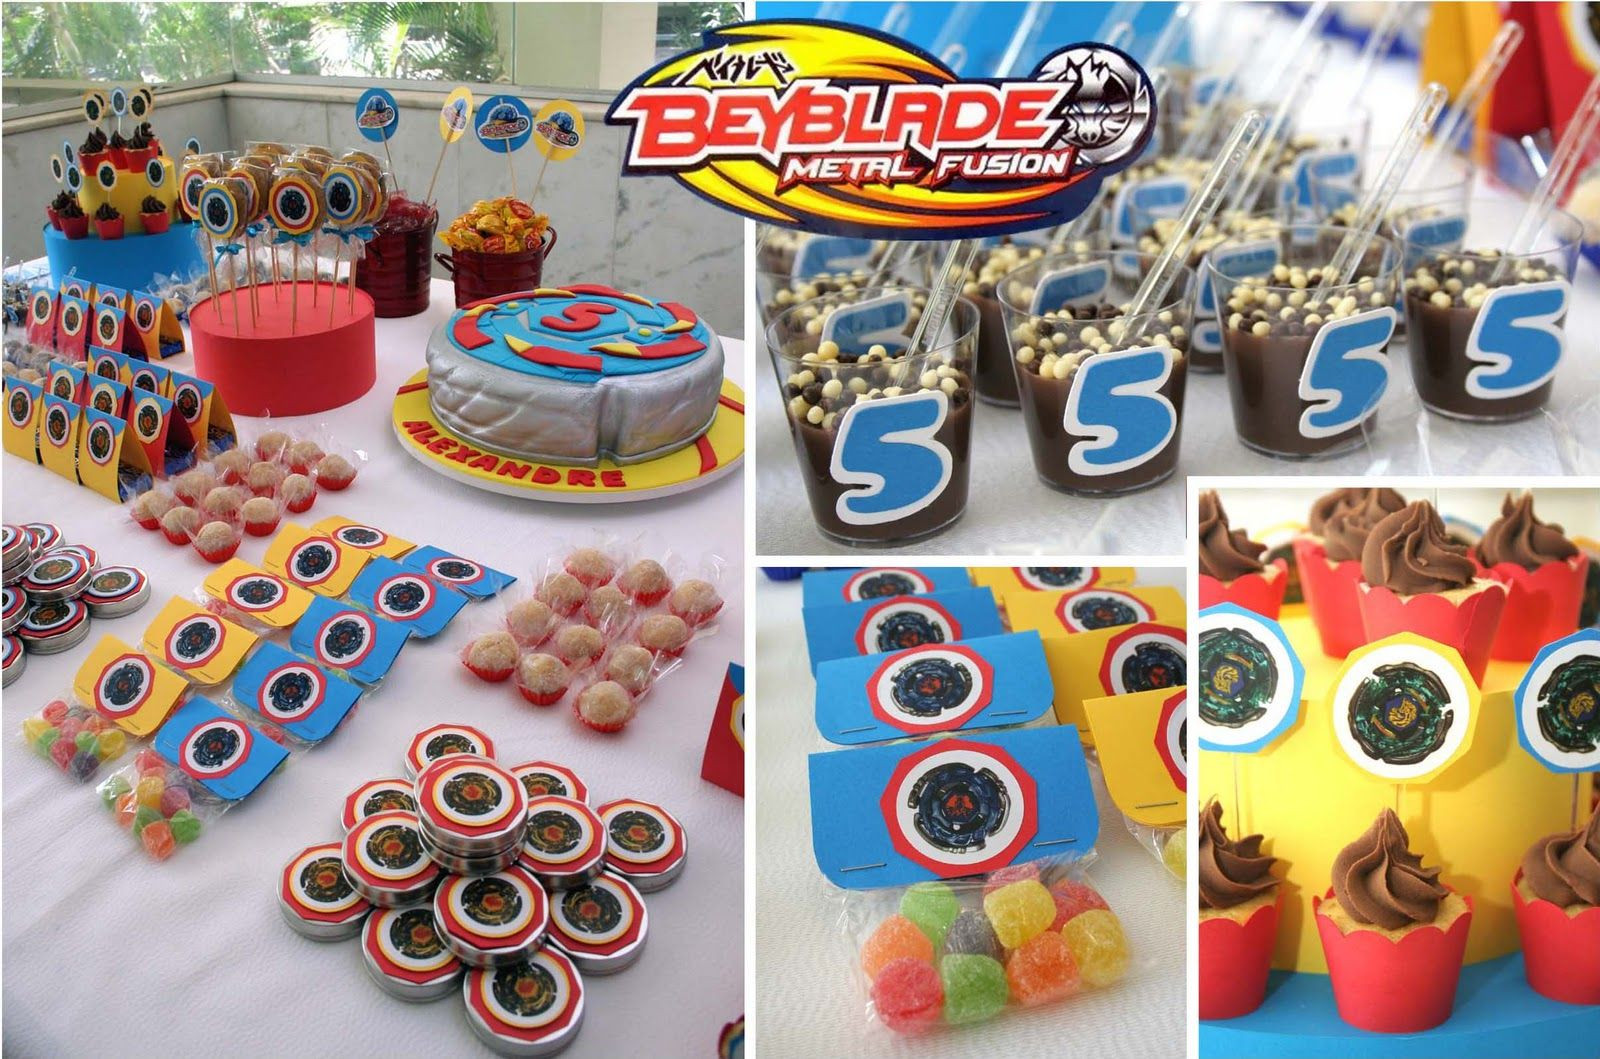 Beyblade Birthday Party Ideas
 Beyblade Party Idea Perfect for boys in 2019